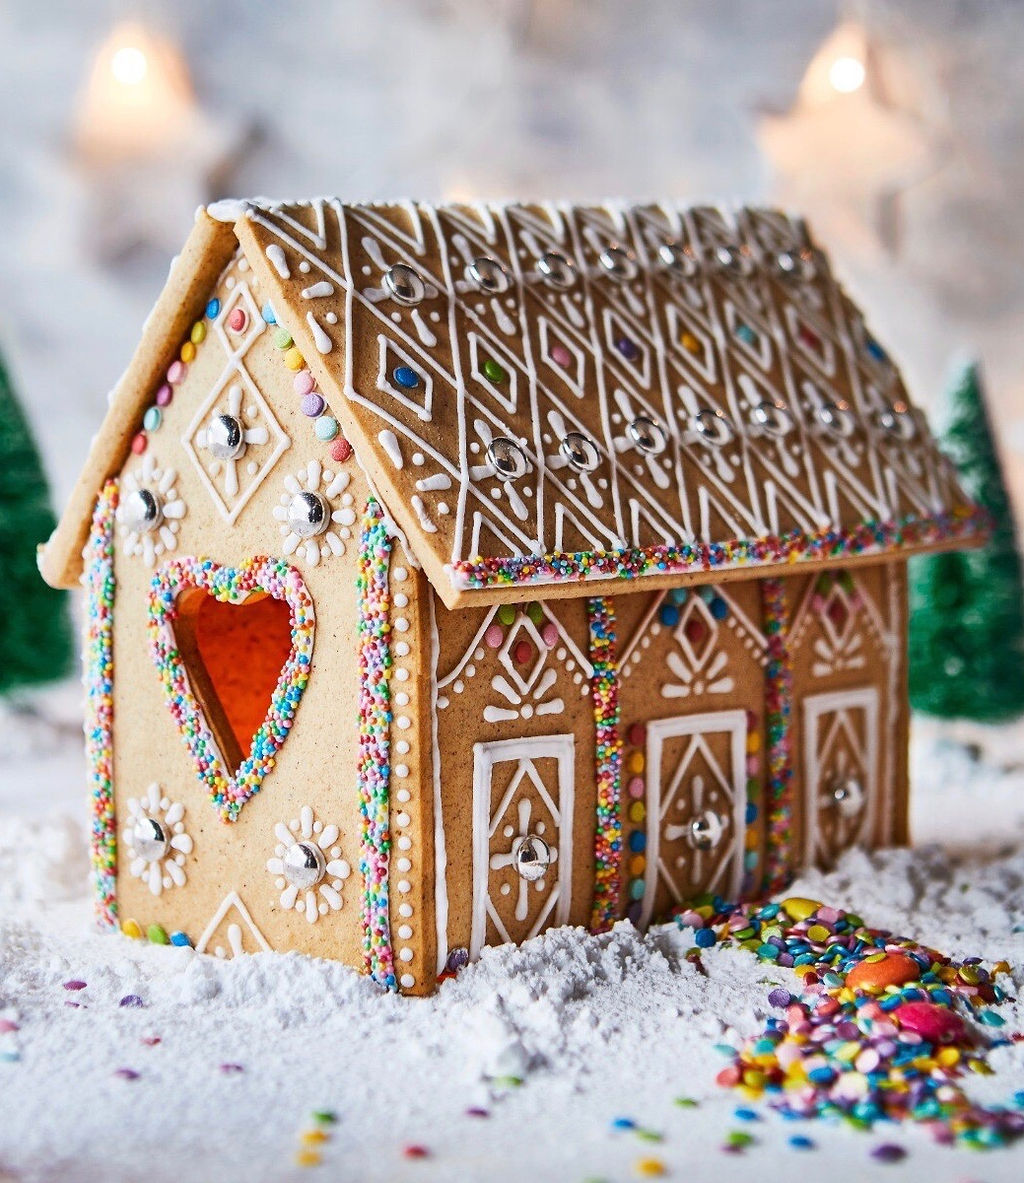 I Made a Gluten-Free Gingerbread House and It Was So Easy! 